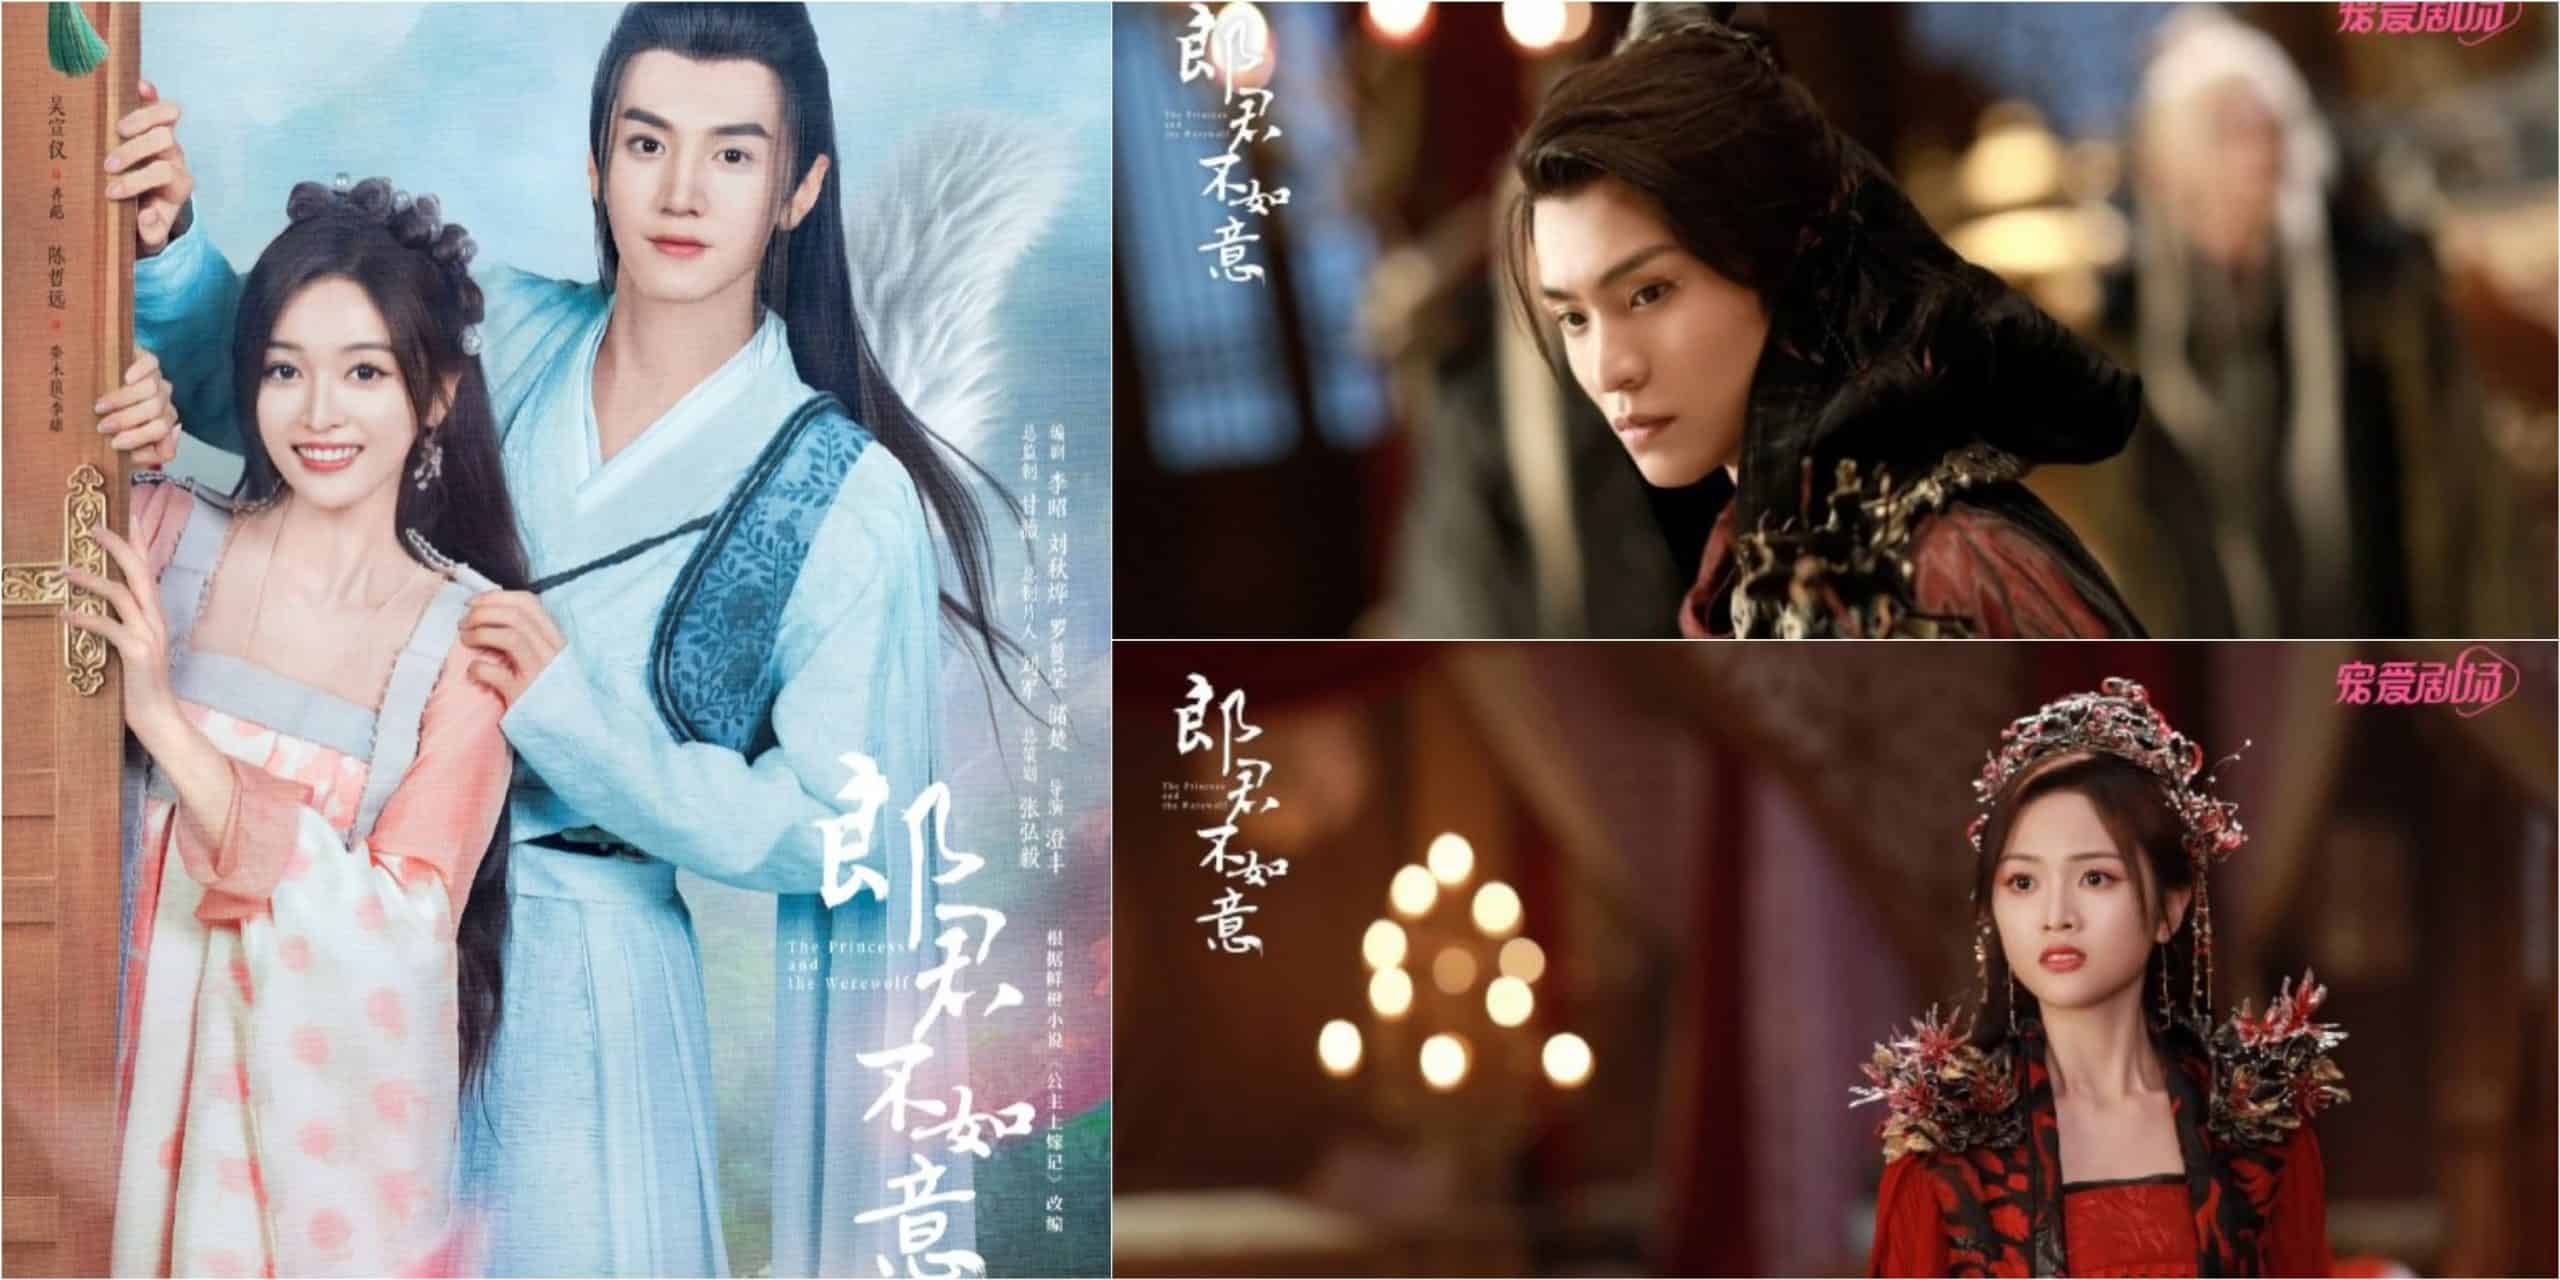 Chinese Fantasy Drama The Princess and The Werewolf Episode 20 Release Date